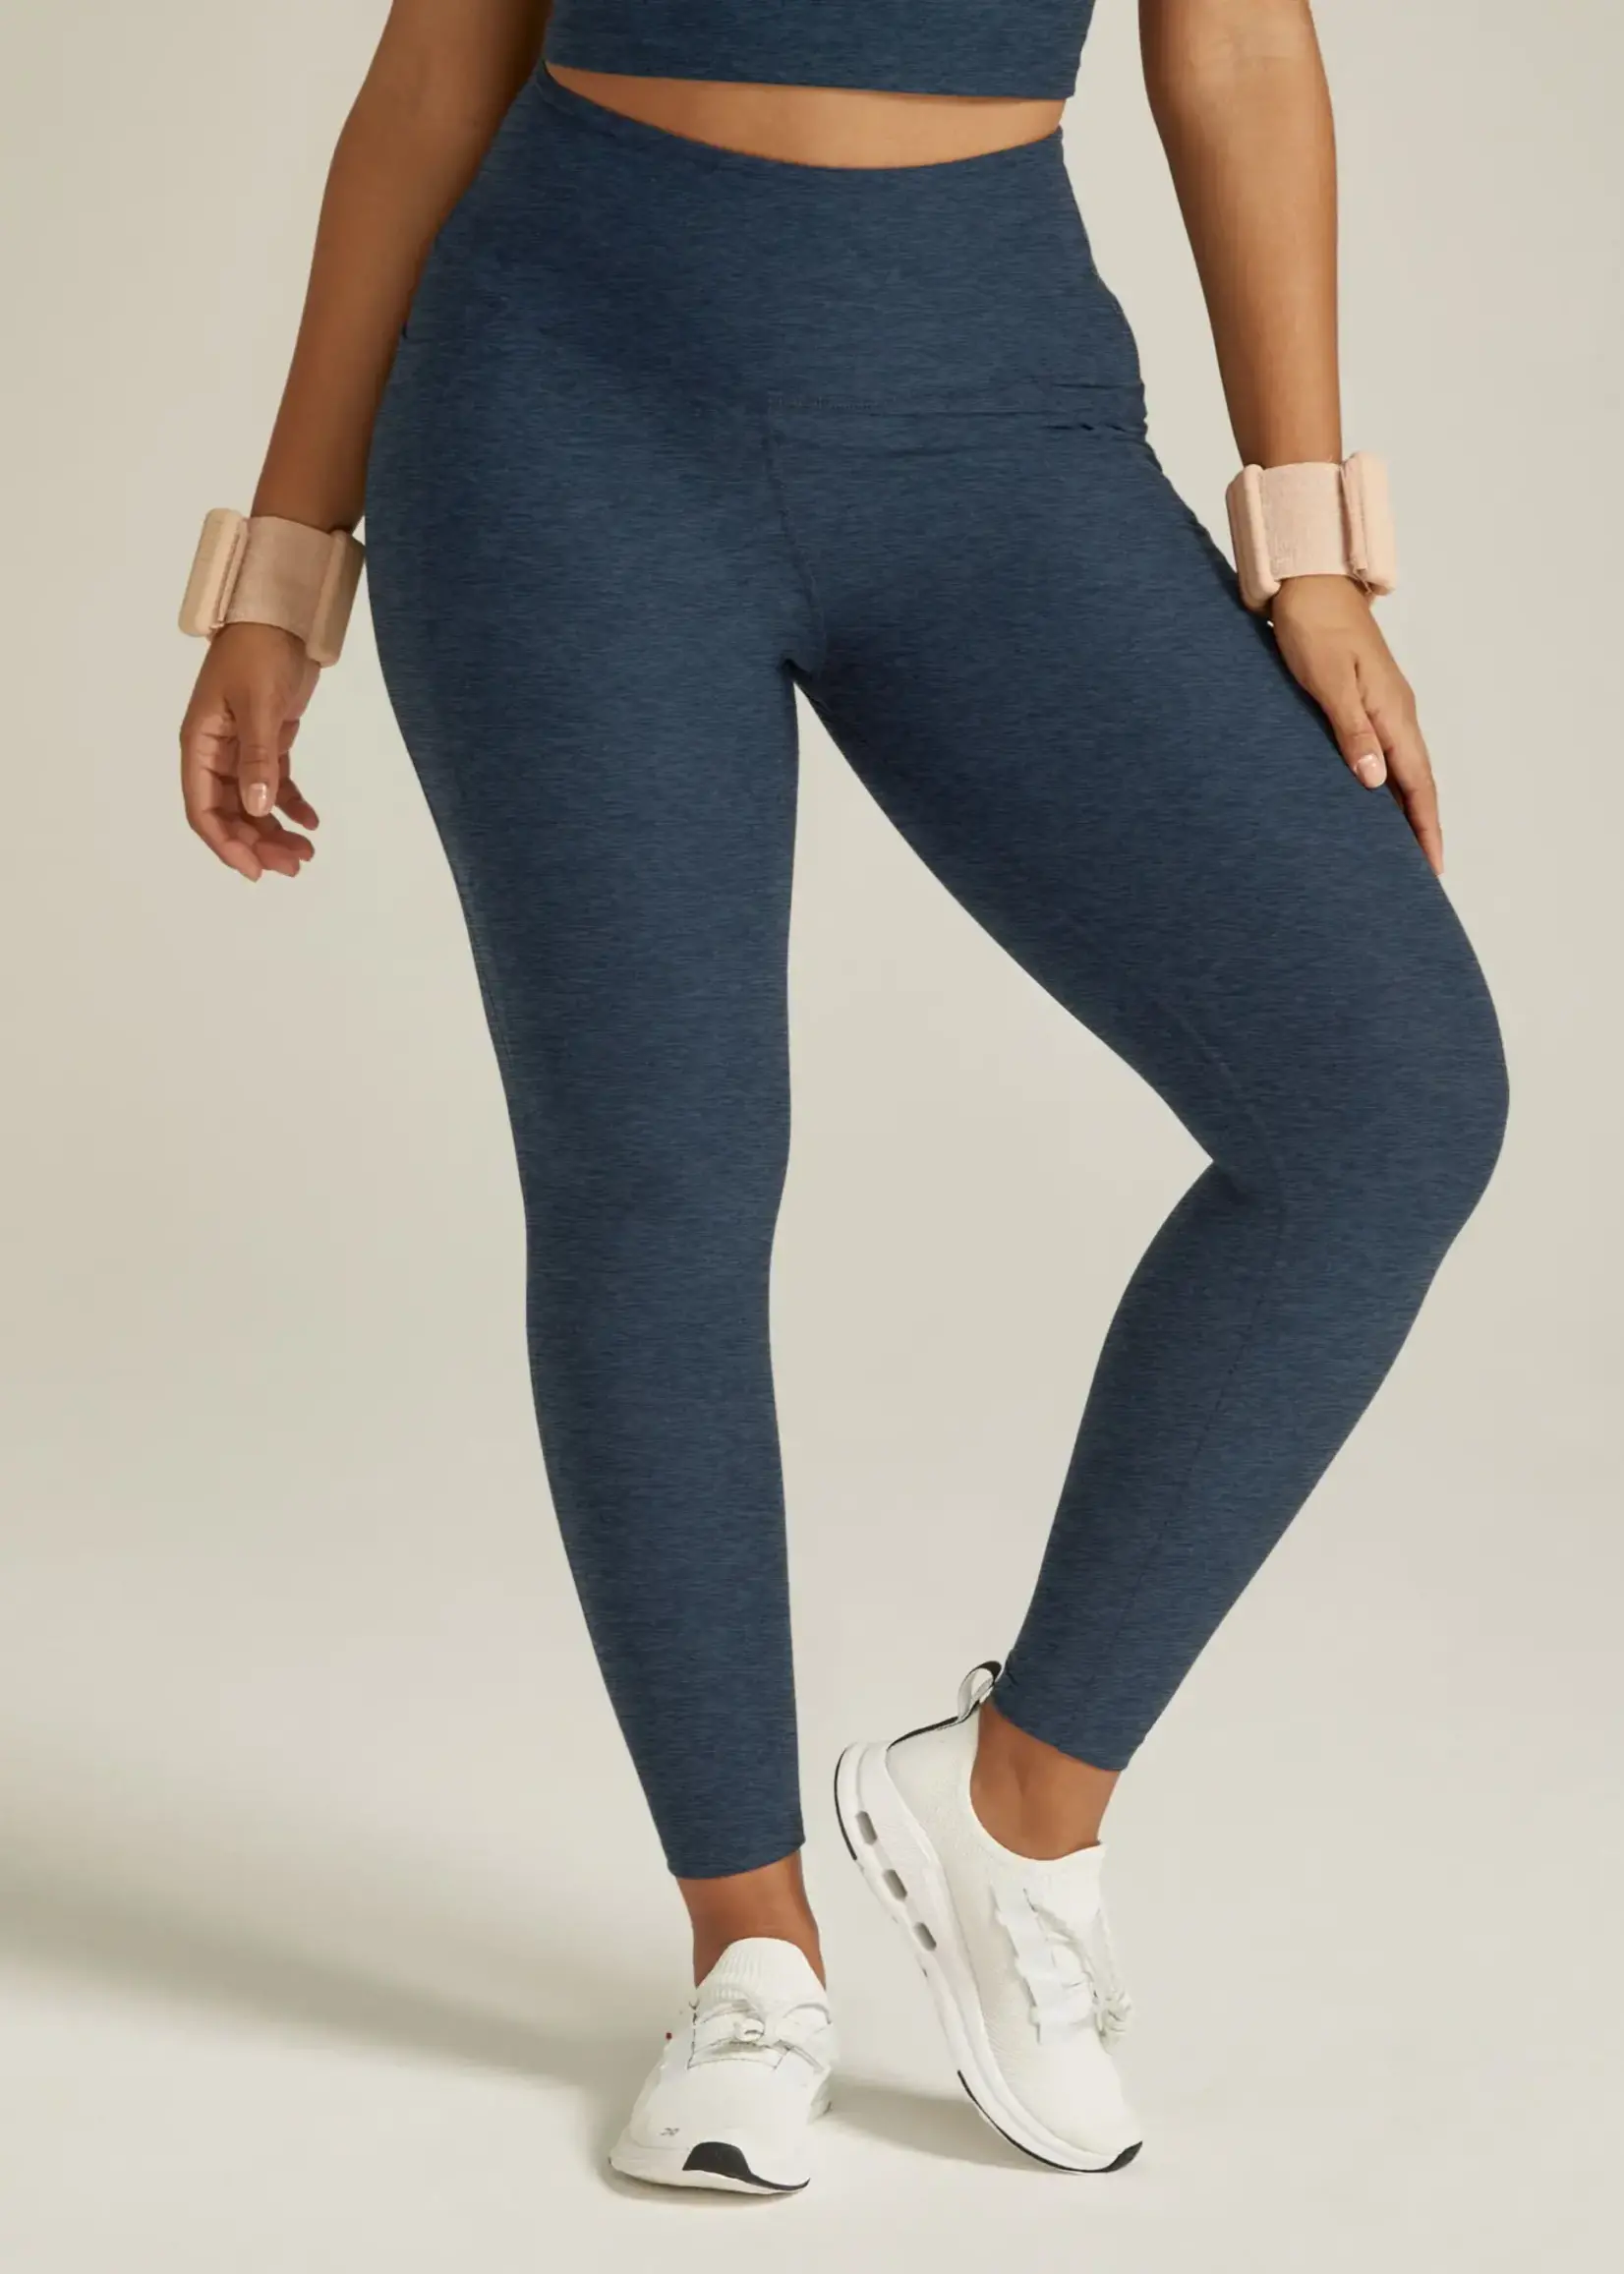 Beyond Yoga SPACEDYE OUT OF POCKET HIGH WAISTED MIDI LEGGING- Nocturnal Navy